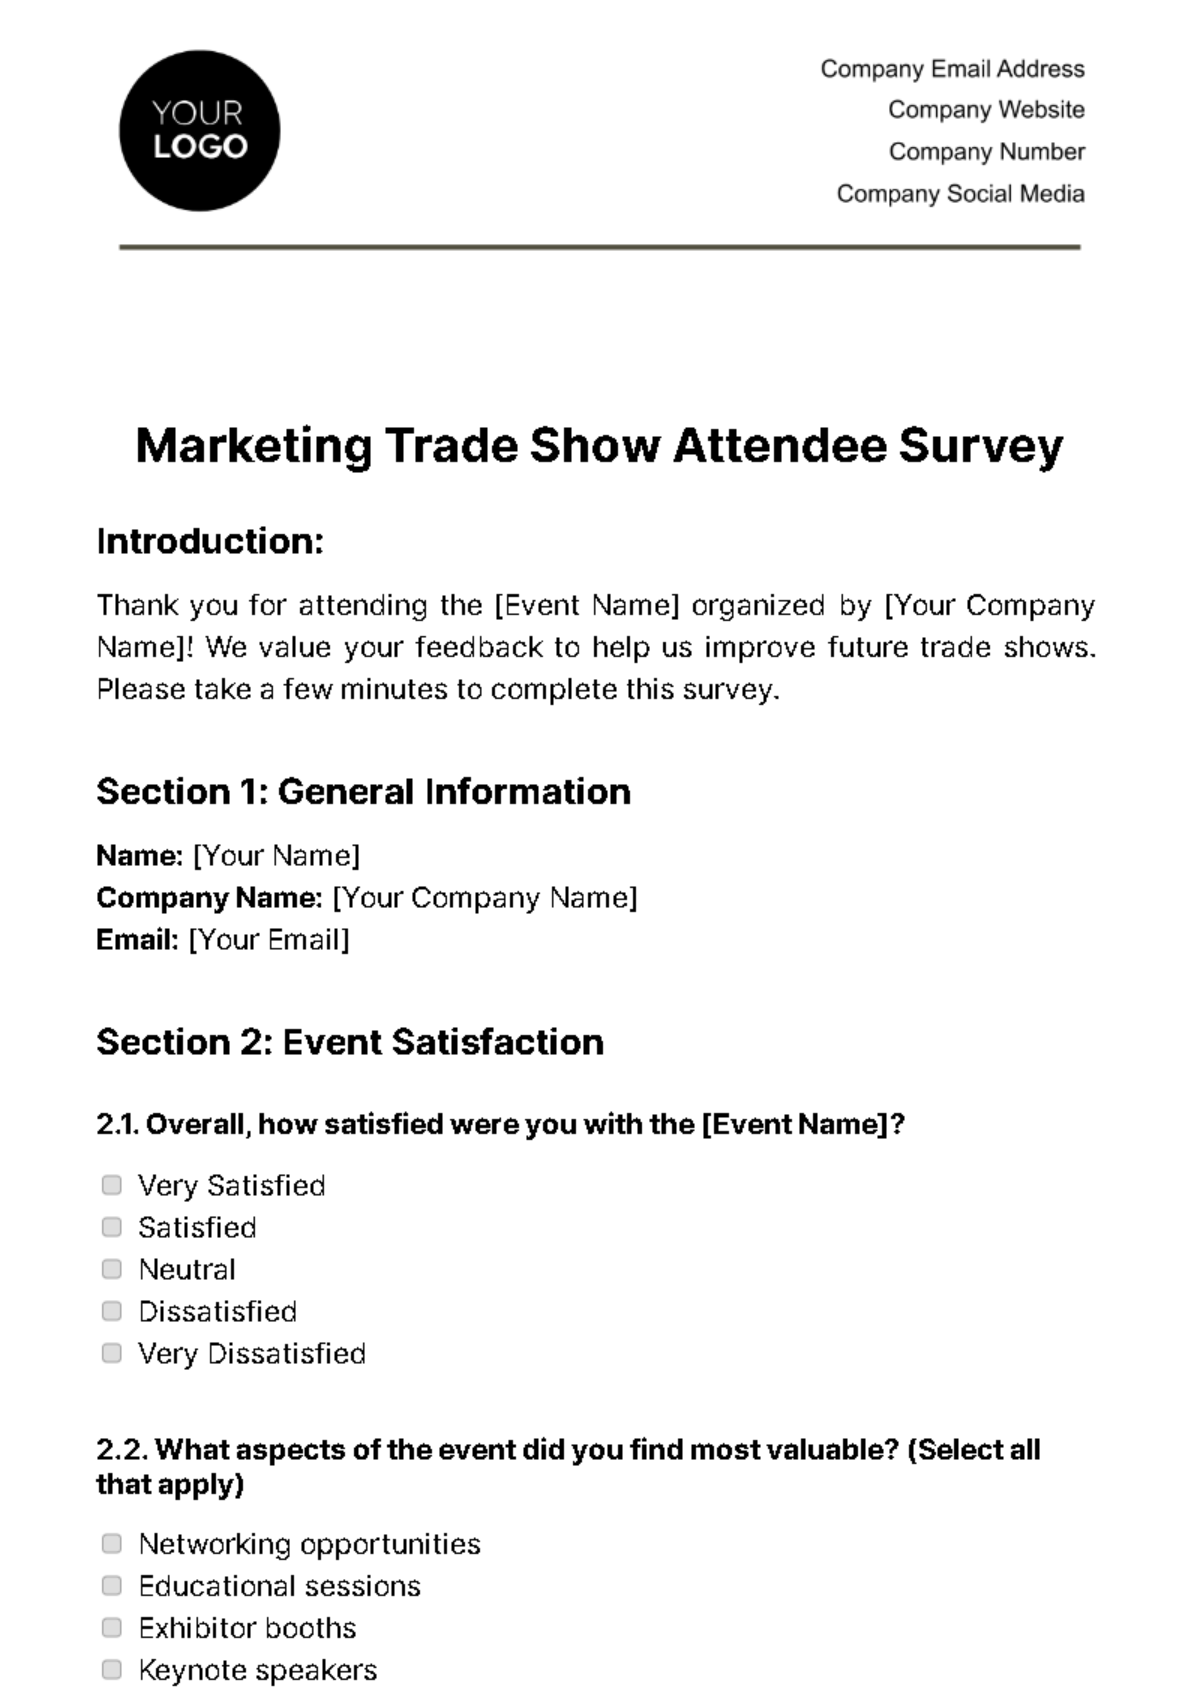 Marketing Trade Show Attendee Survey Template